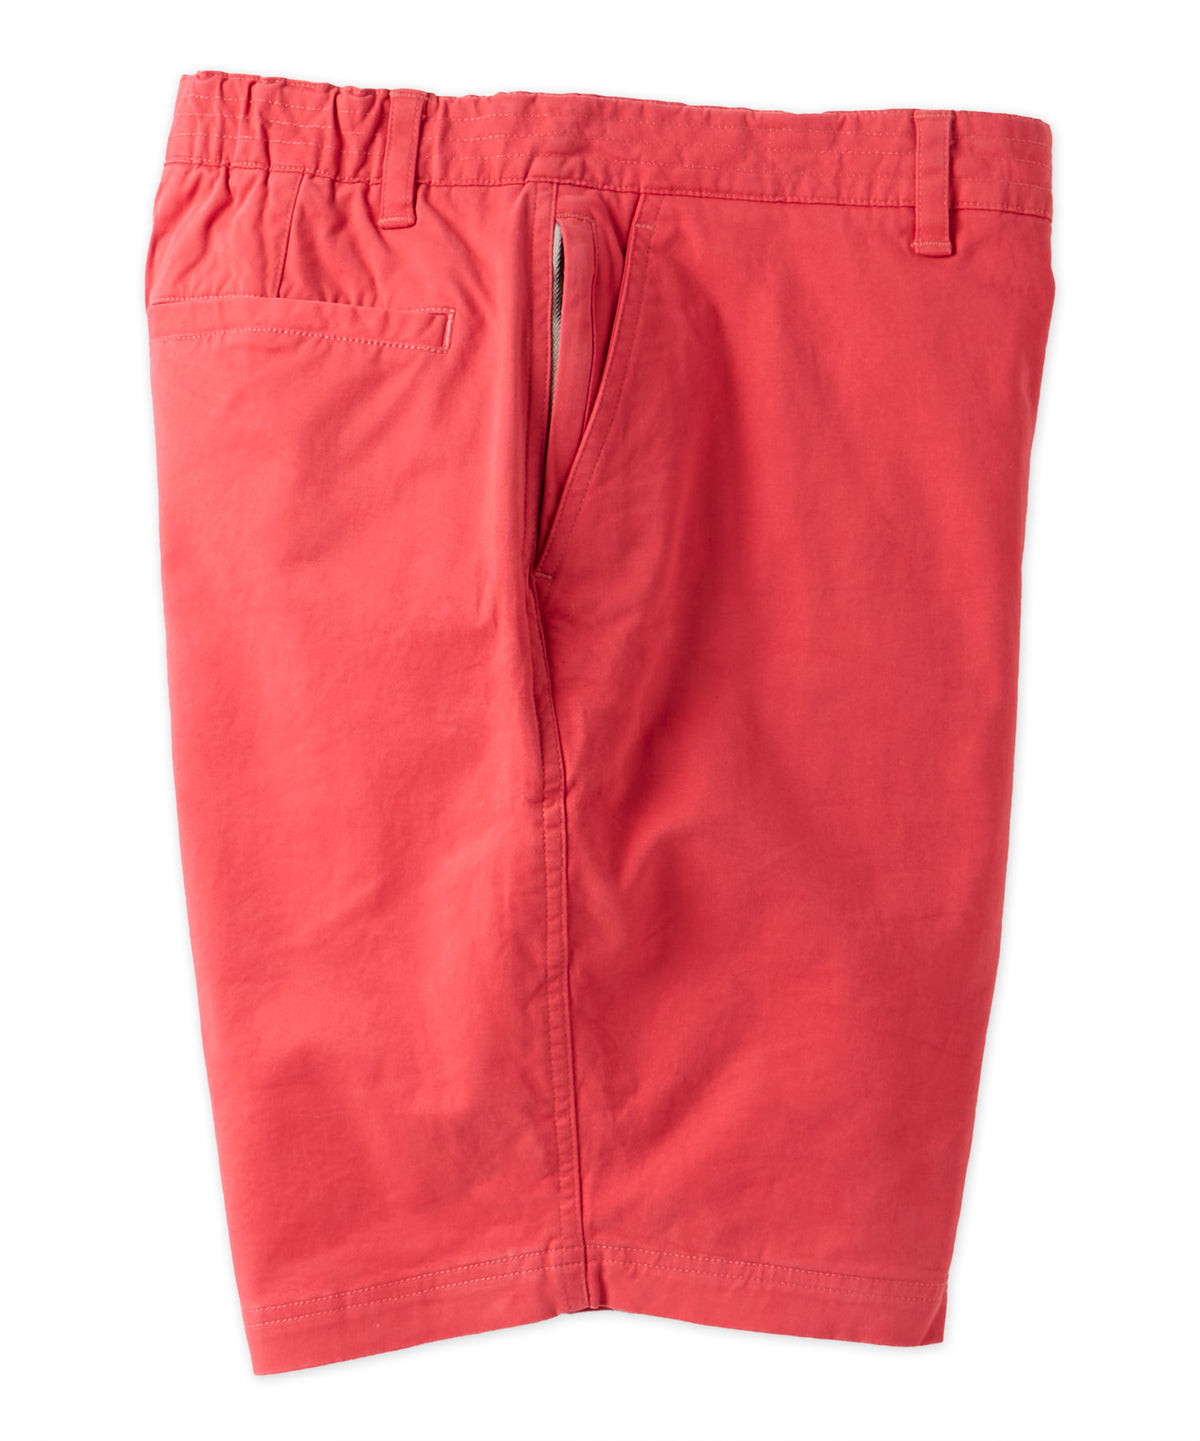 Westport Lifestyle Solid Stretch Comfort Fit Flat-Front Short